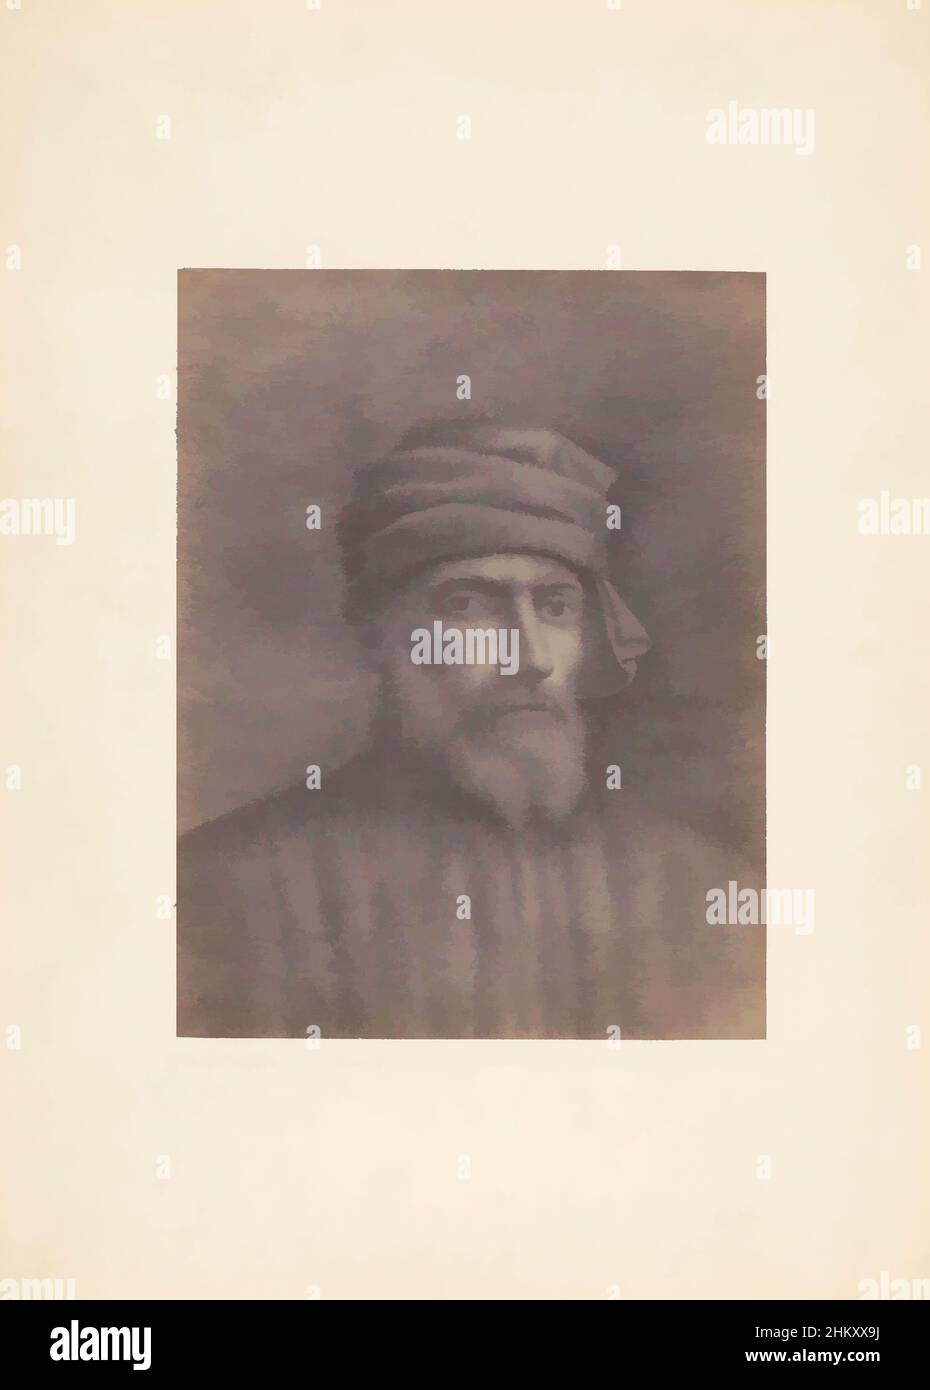 Art inspired by Photoreproduction of (presumably) a fresco by Paolo Uccello, depicting a portrait of Donatello, Portrait of Donatello (Donato di Niccoló di Betto Bardi) by Paolo Ucello., Paolo Uccello, c. 1875 - c. 1900, cardboard, albumen print, height 242 mm × width 186 mm, Classic works modernized by Artotop with a splash of modernity. Shapes, color and value, eye-catching visual impact on art. Emotions through freedom of artworks in a contemporary way. A timeless message pursuing a wildly creative new direction. Artists turning to the digital medium and creating the Artotop NFT Stock Photo